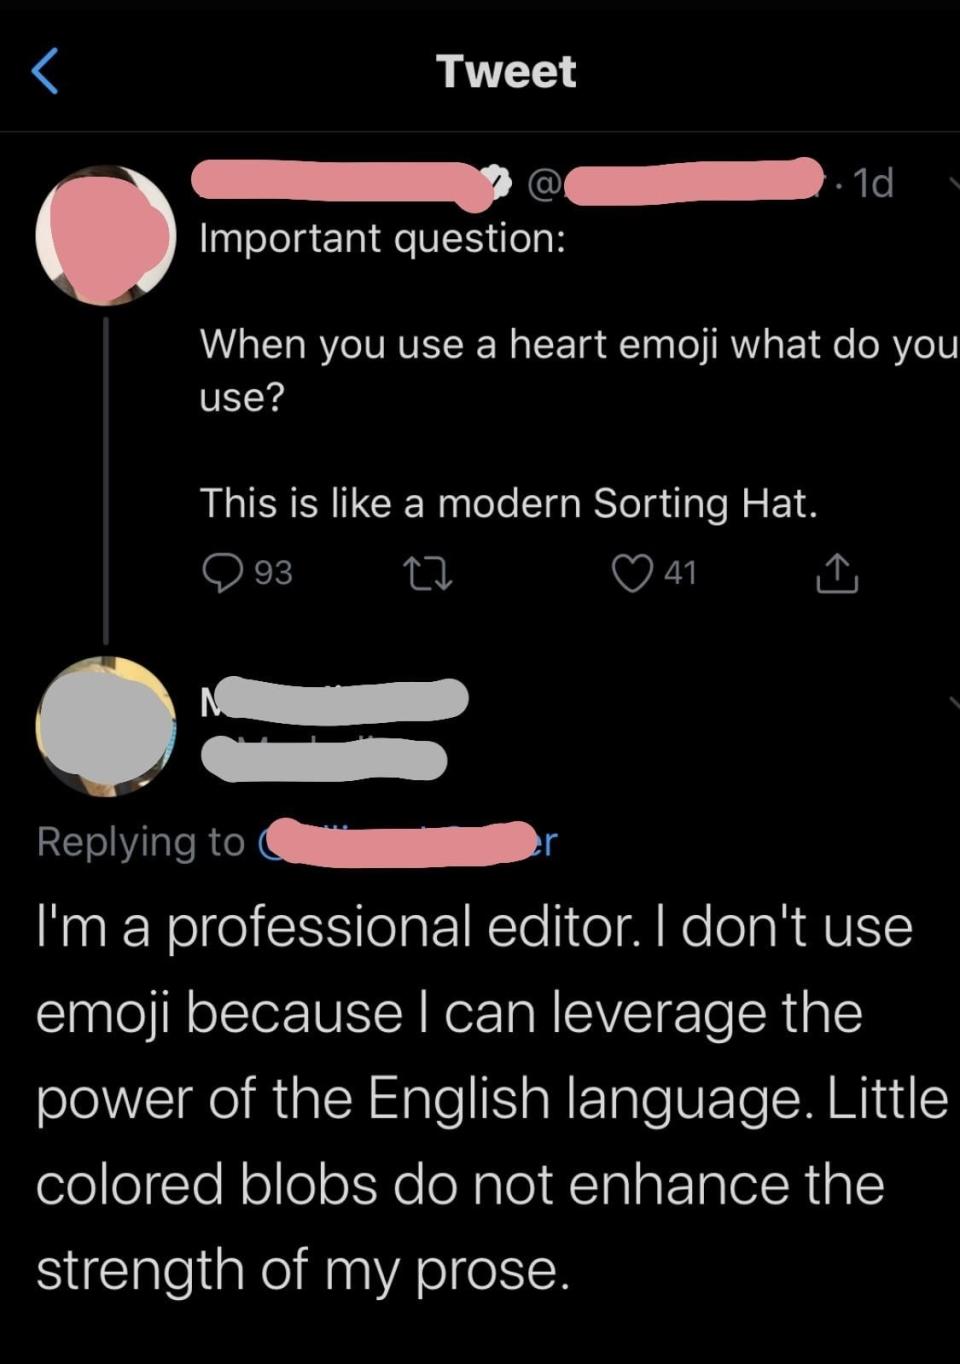 Tweet with a question about heart emoji use, and a reply stating preference for English language over emoji due to prose clarity